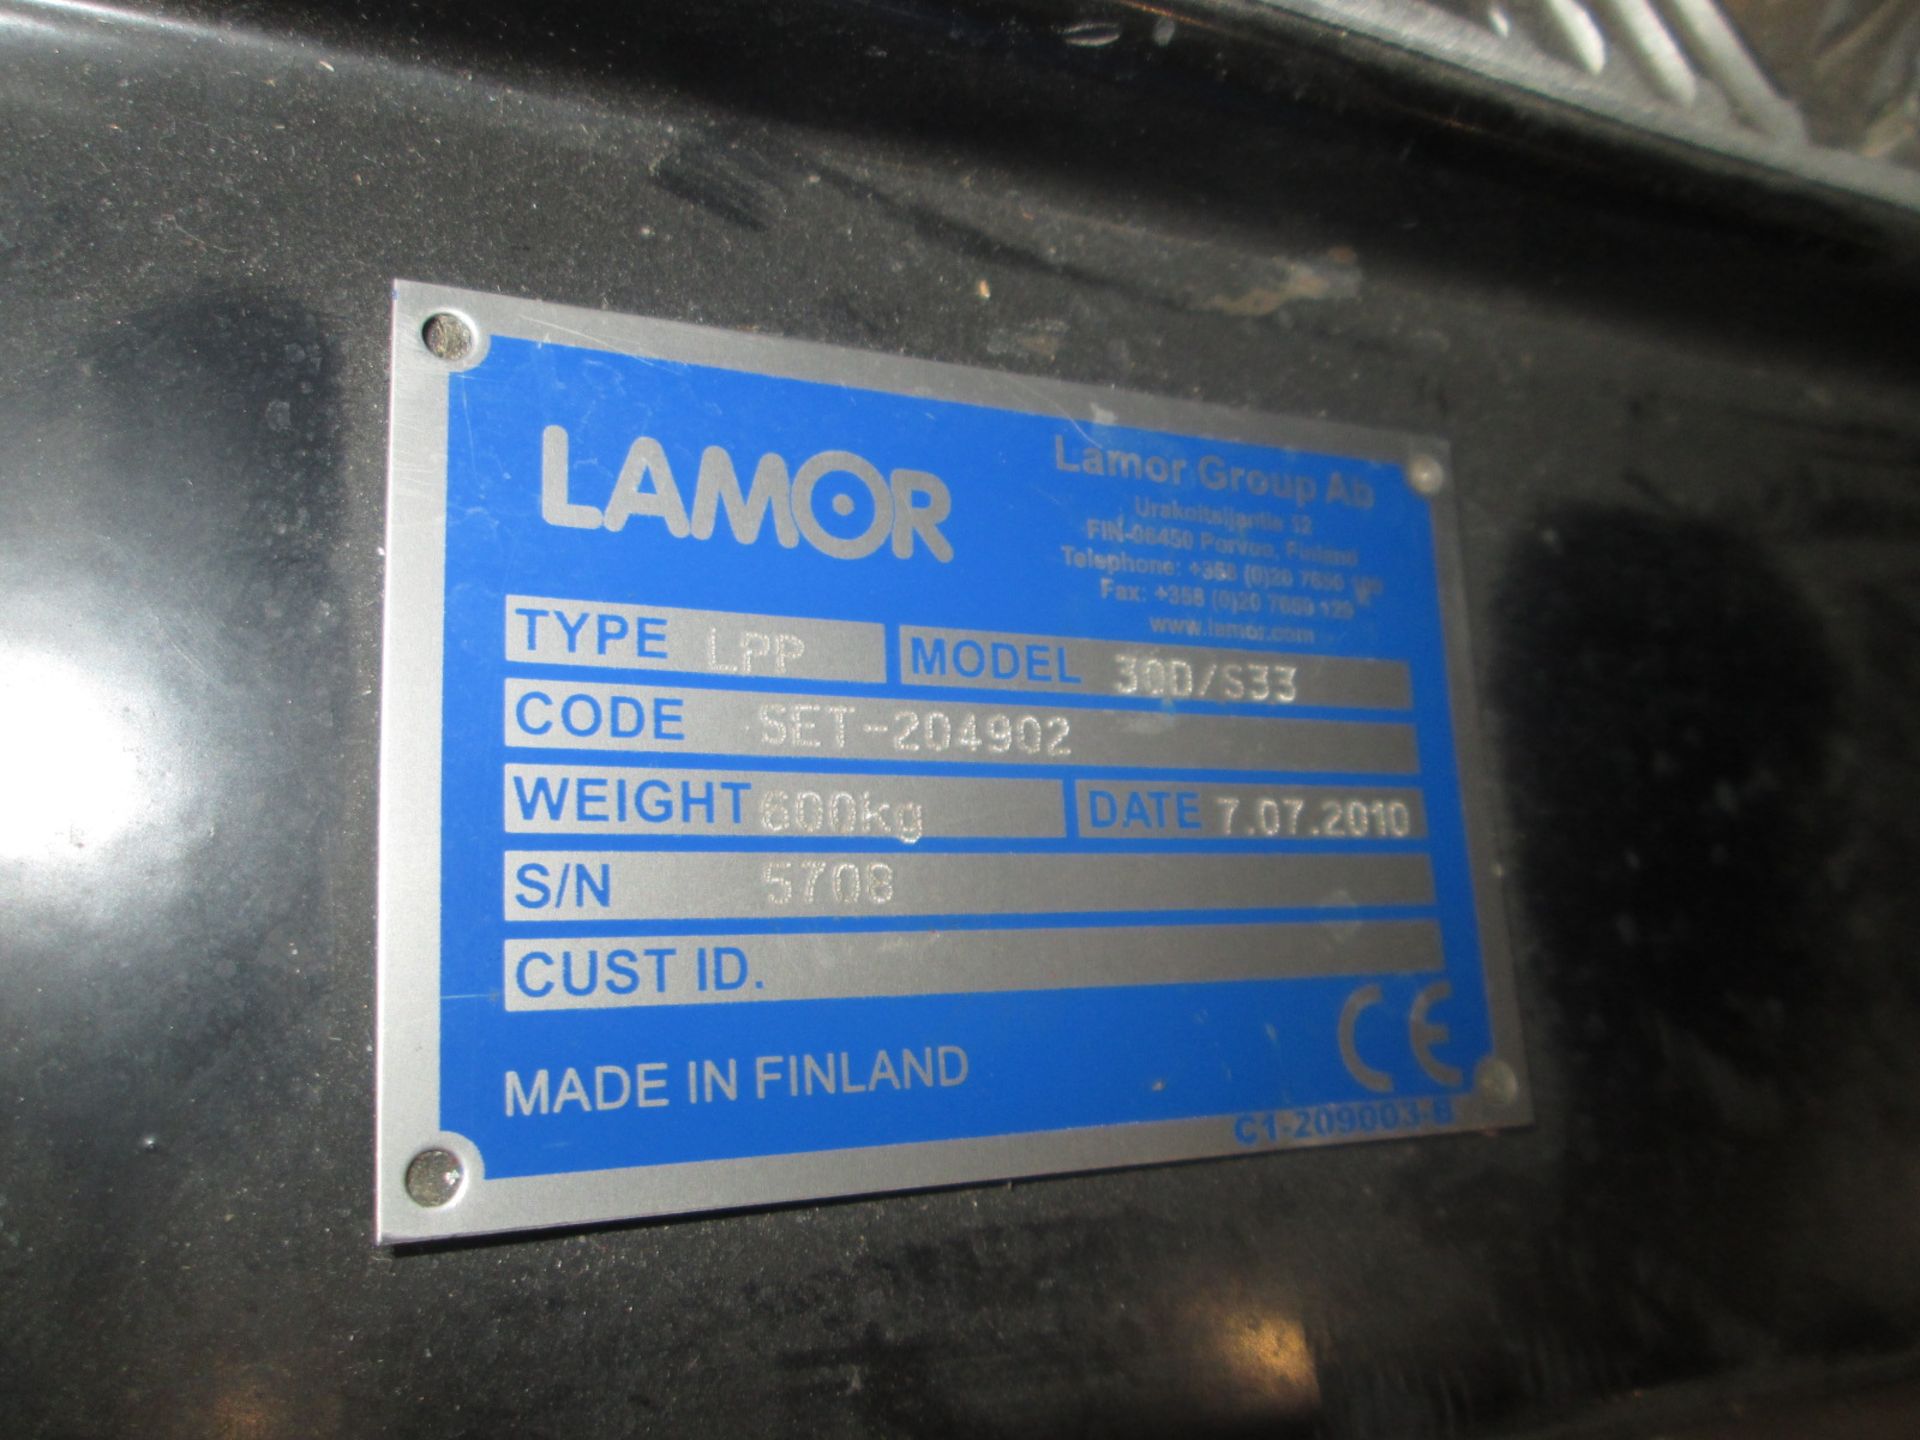 LAMOR SLICKBAR LPP 30 ENCLOSED HYDRAULIC POWER PACK WITH LOMBARDINI DIESEL ENGINE AND ELECTRIC START - Image 2 of 3